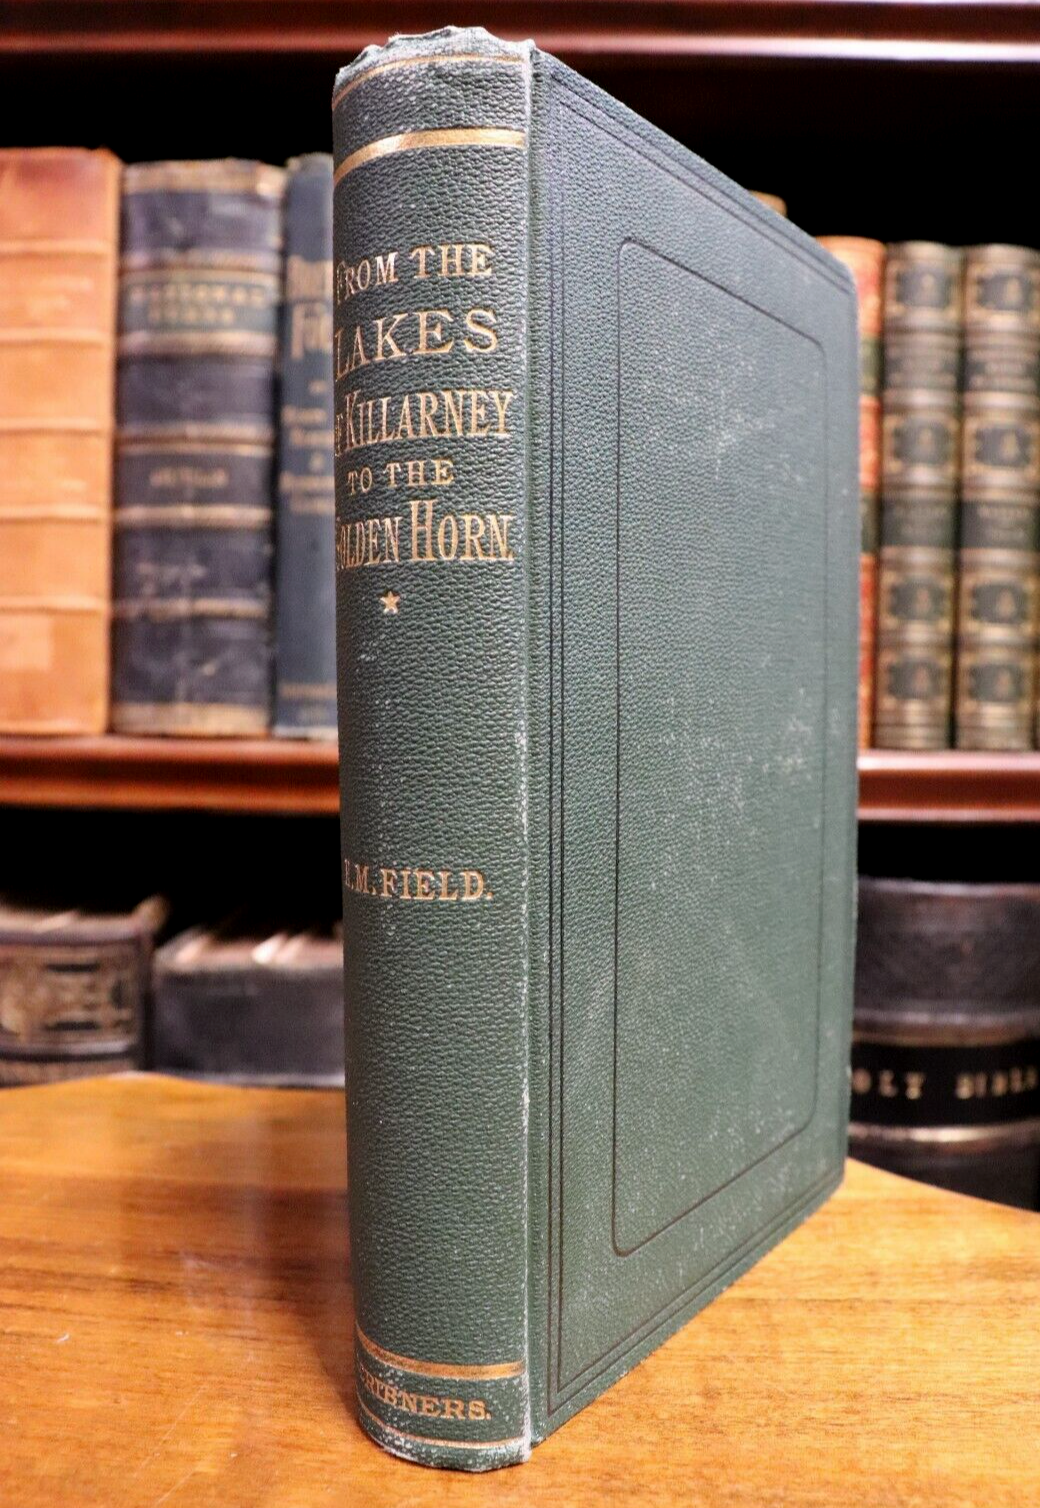 From The Lakes Of Killarney To The Golden Horn - 1885 - Antique Travel Book